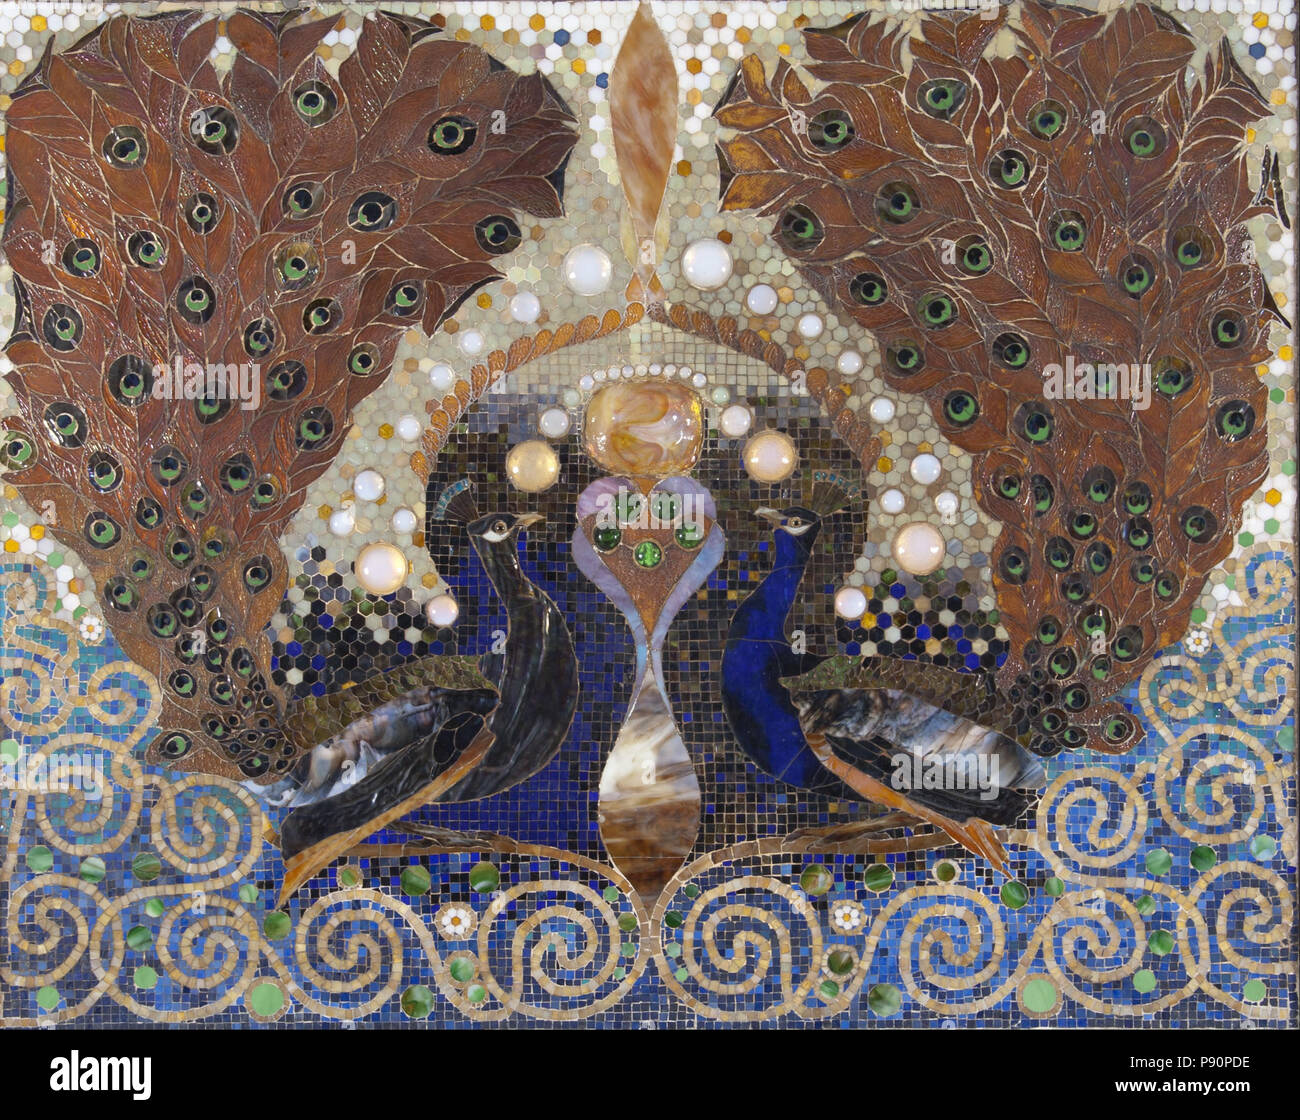 Louis Comfort Tiffany: Treasures from the Driehaus Collection